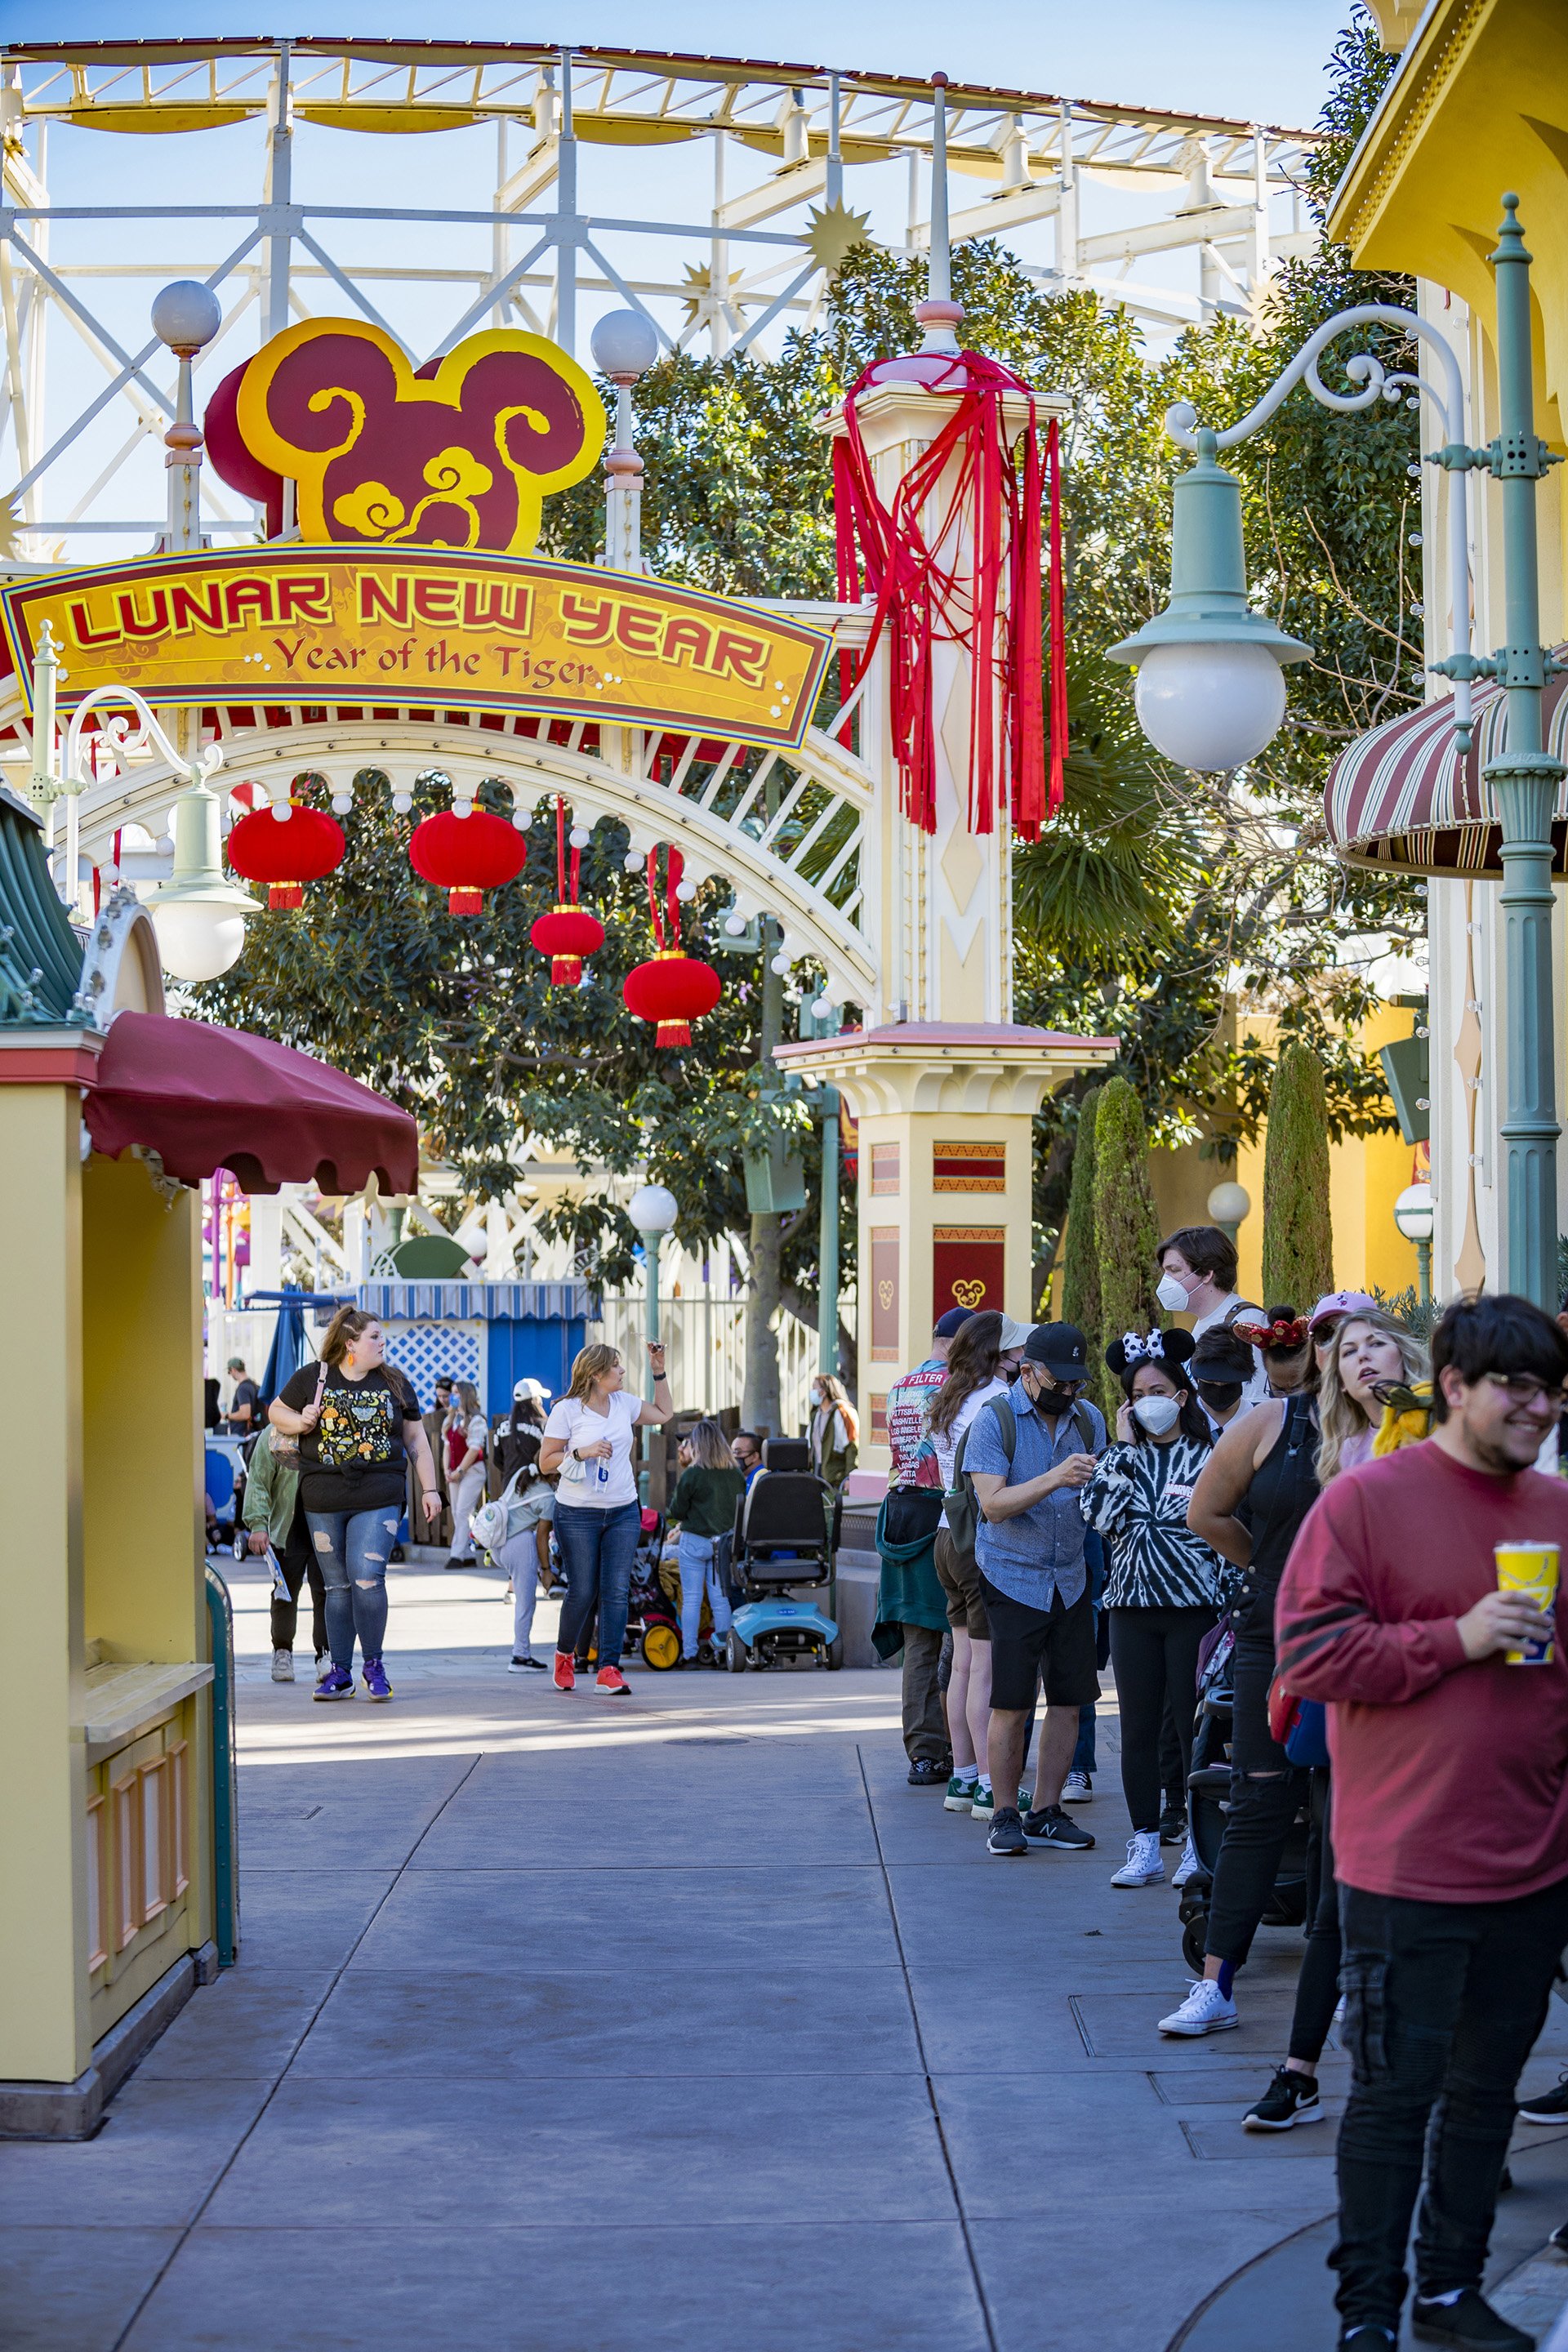  The lines weren’t even this bad during the Festival of the Holidays, and the only thing I can think of that explains the difference was more booths to distribute the crowds.  It looks like next year, the Lunar New Year Celebration needs more food of